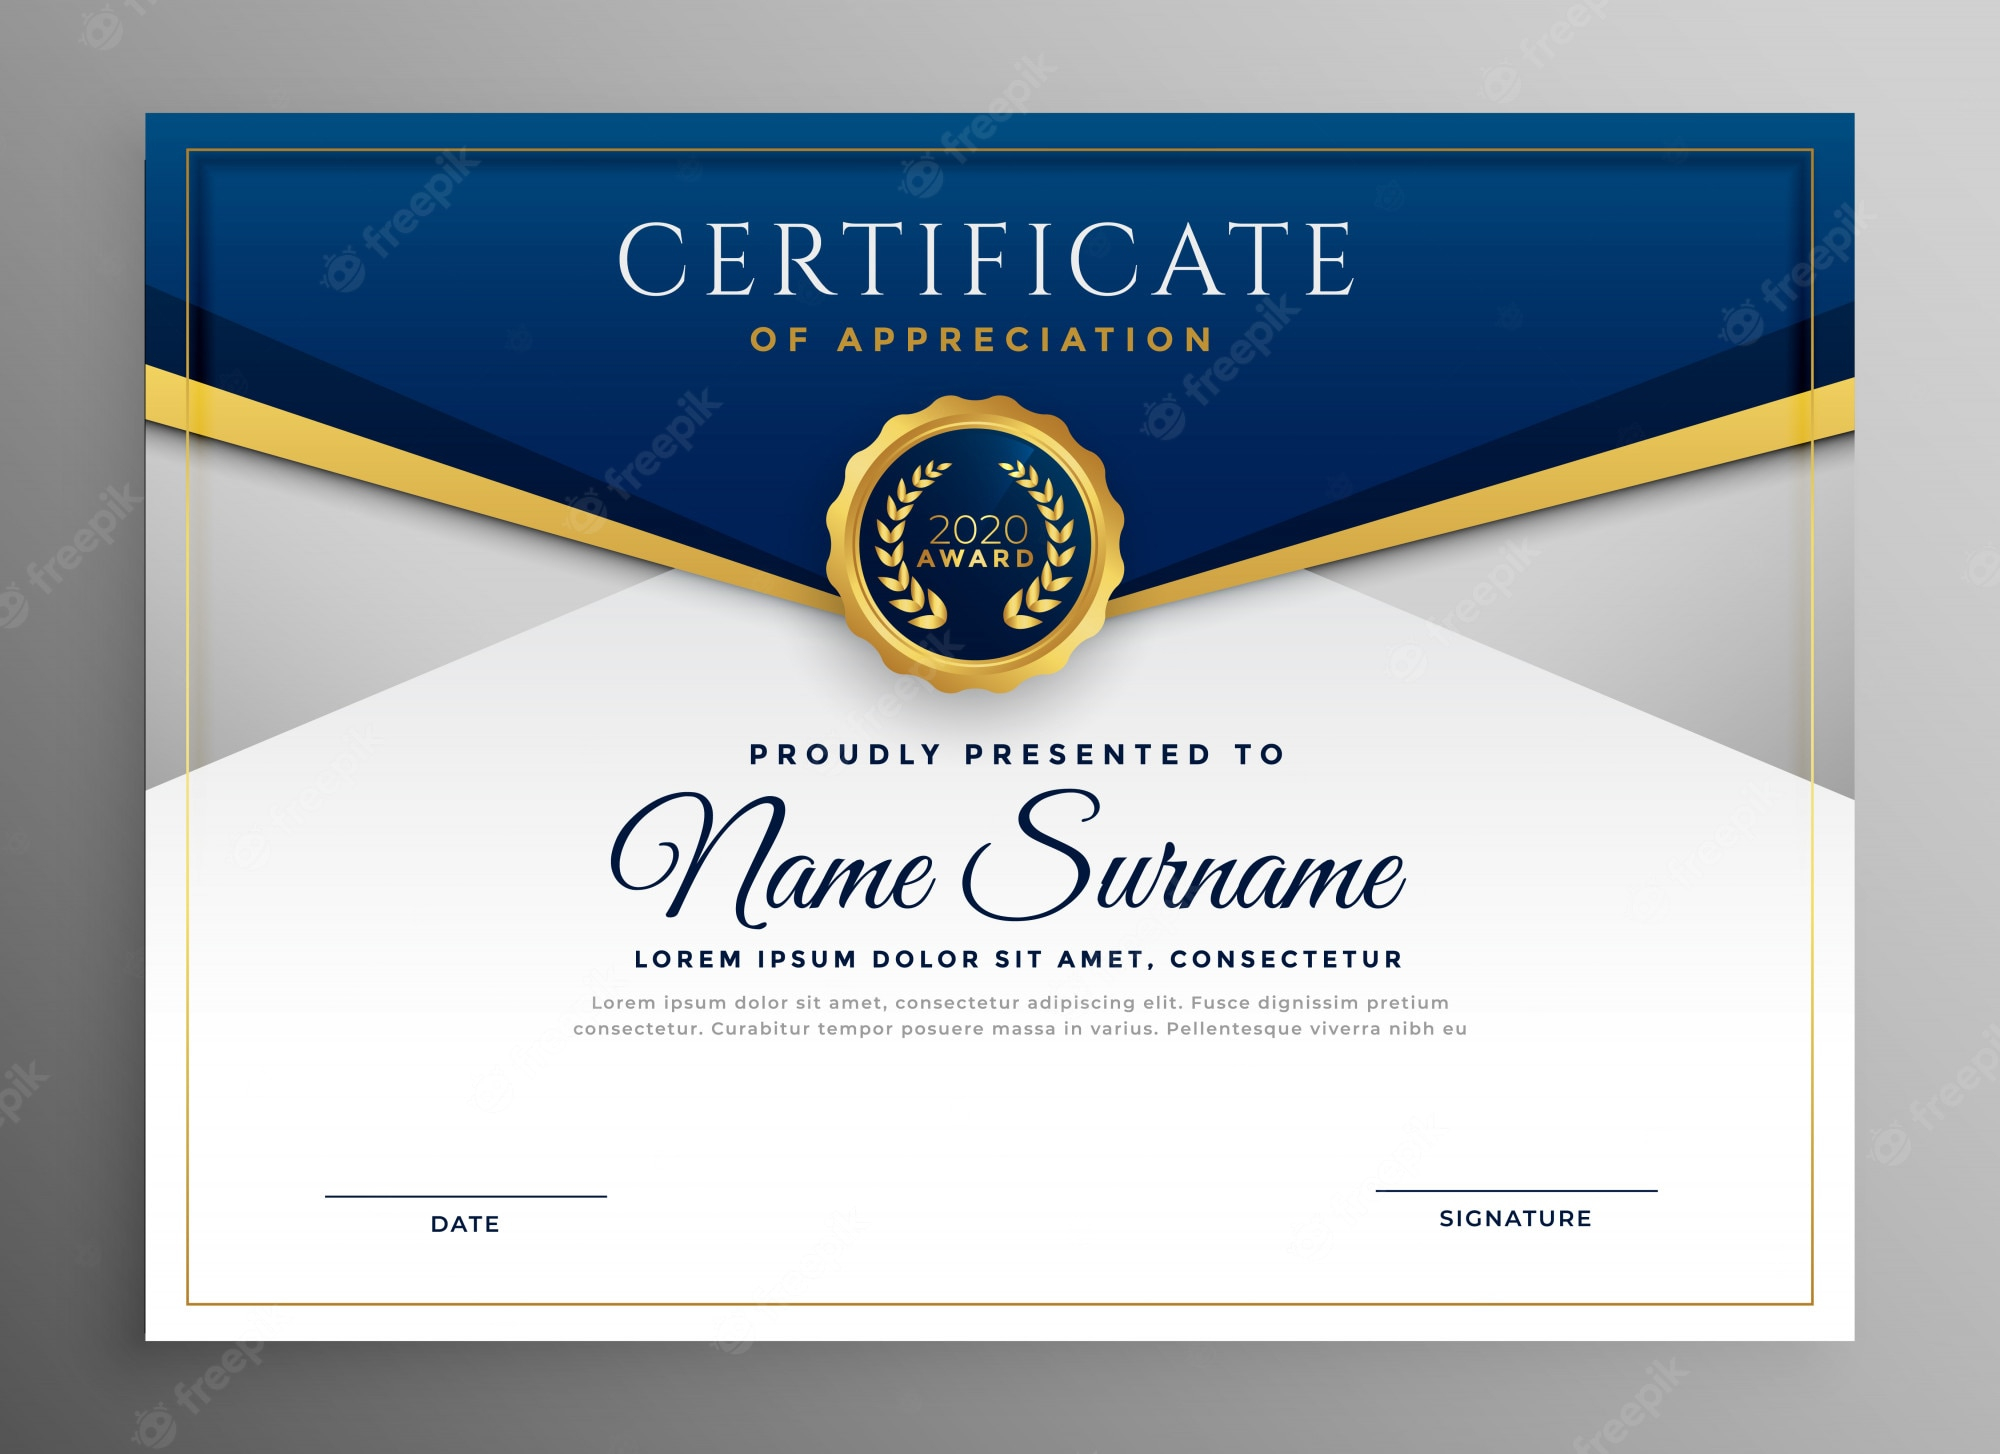 Certificate appreciation Images  Free Vectors, Stock Photos & PSD Pertaining To Certificate Of Appreciation Template Free Printable